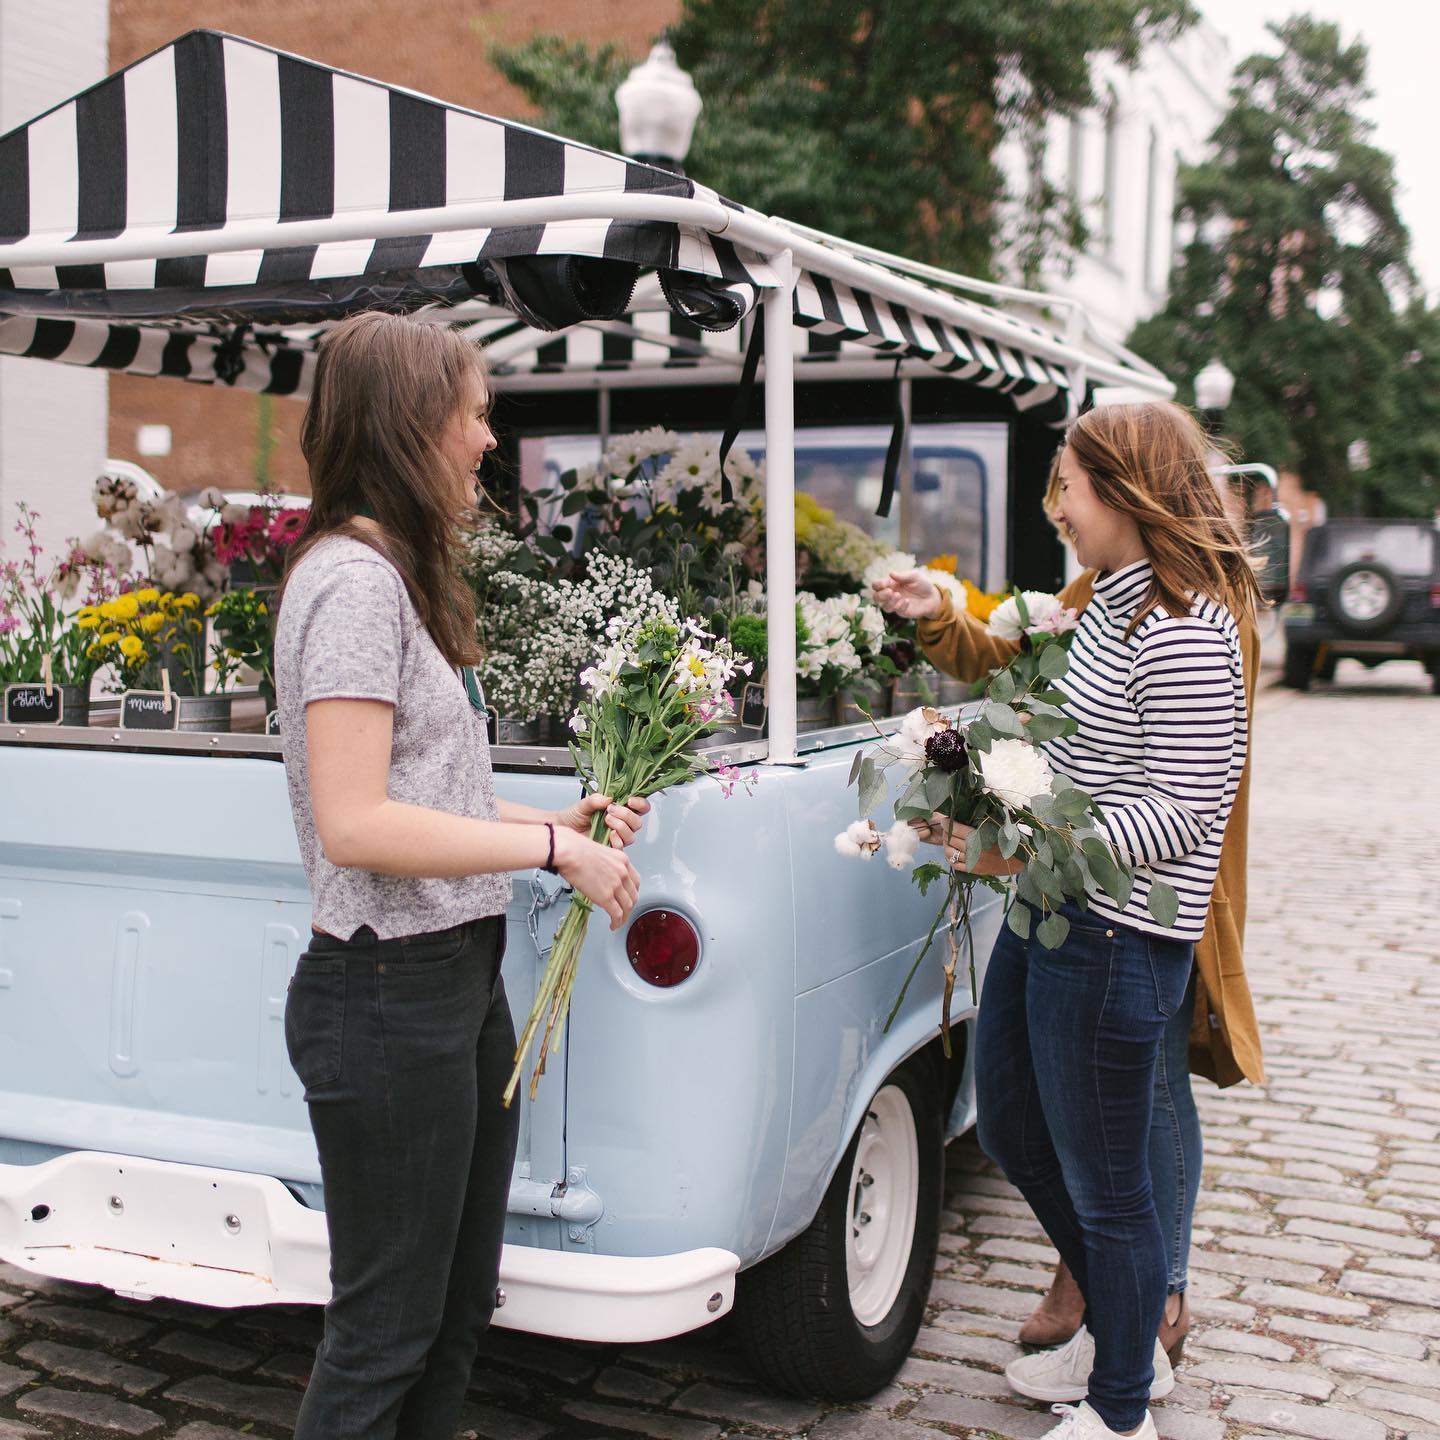 wild honey flower truck 5 reasons not to miss Trove’s Grand Opening this Saturday in Woodlawn. Hint: massage is one of them.